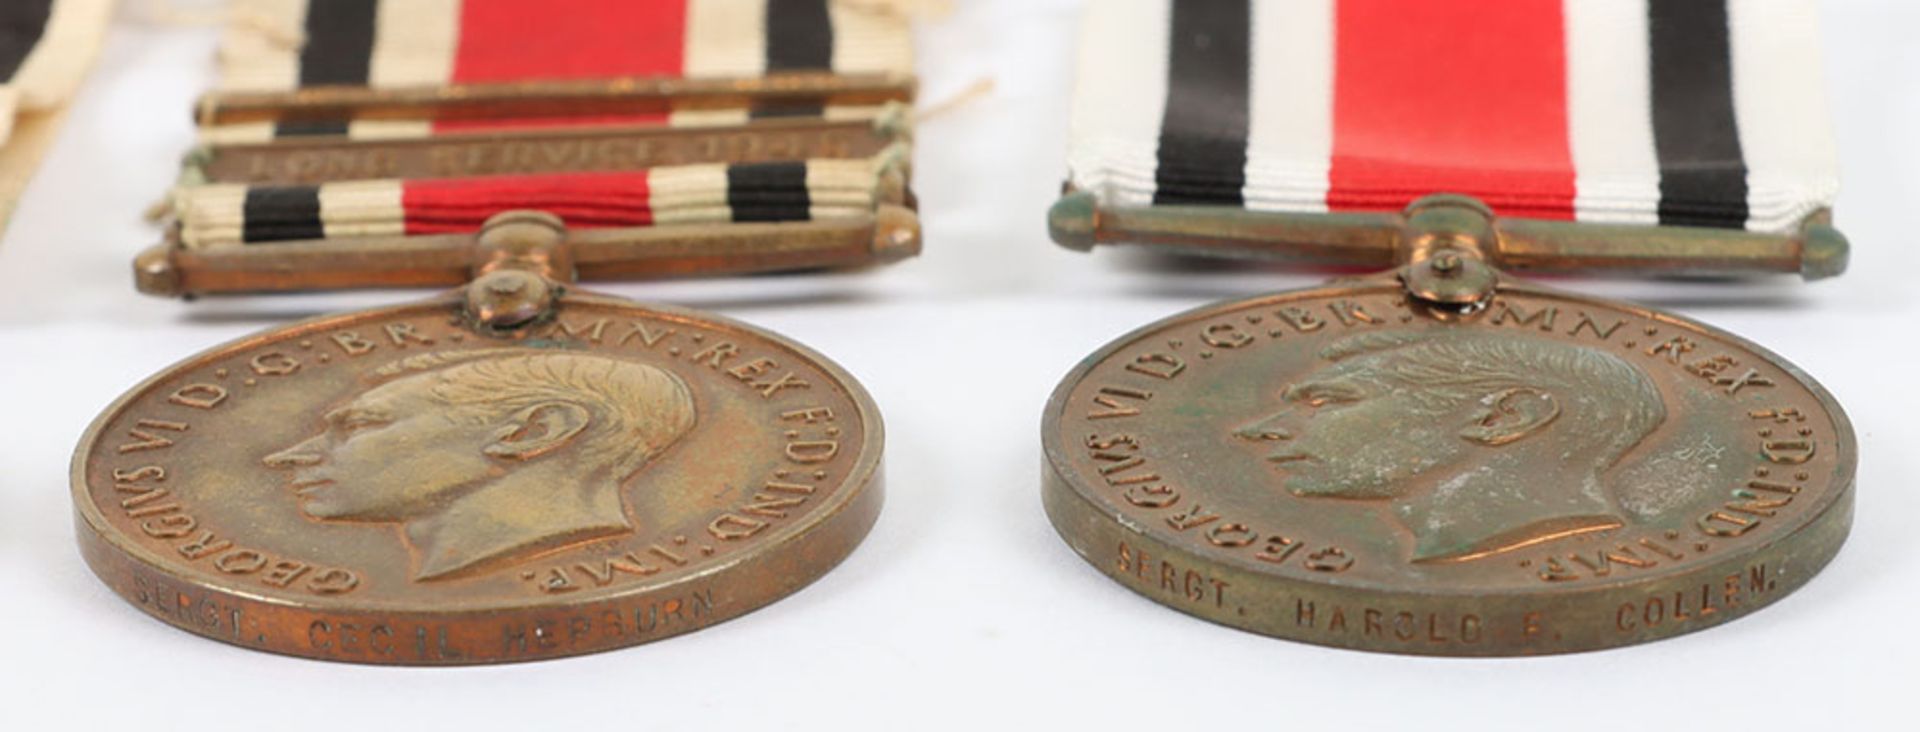 5x George VI Special Constabulary Medals - Image 4 of 5